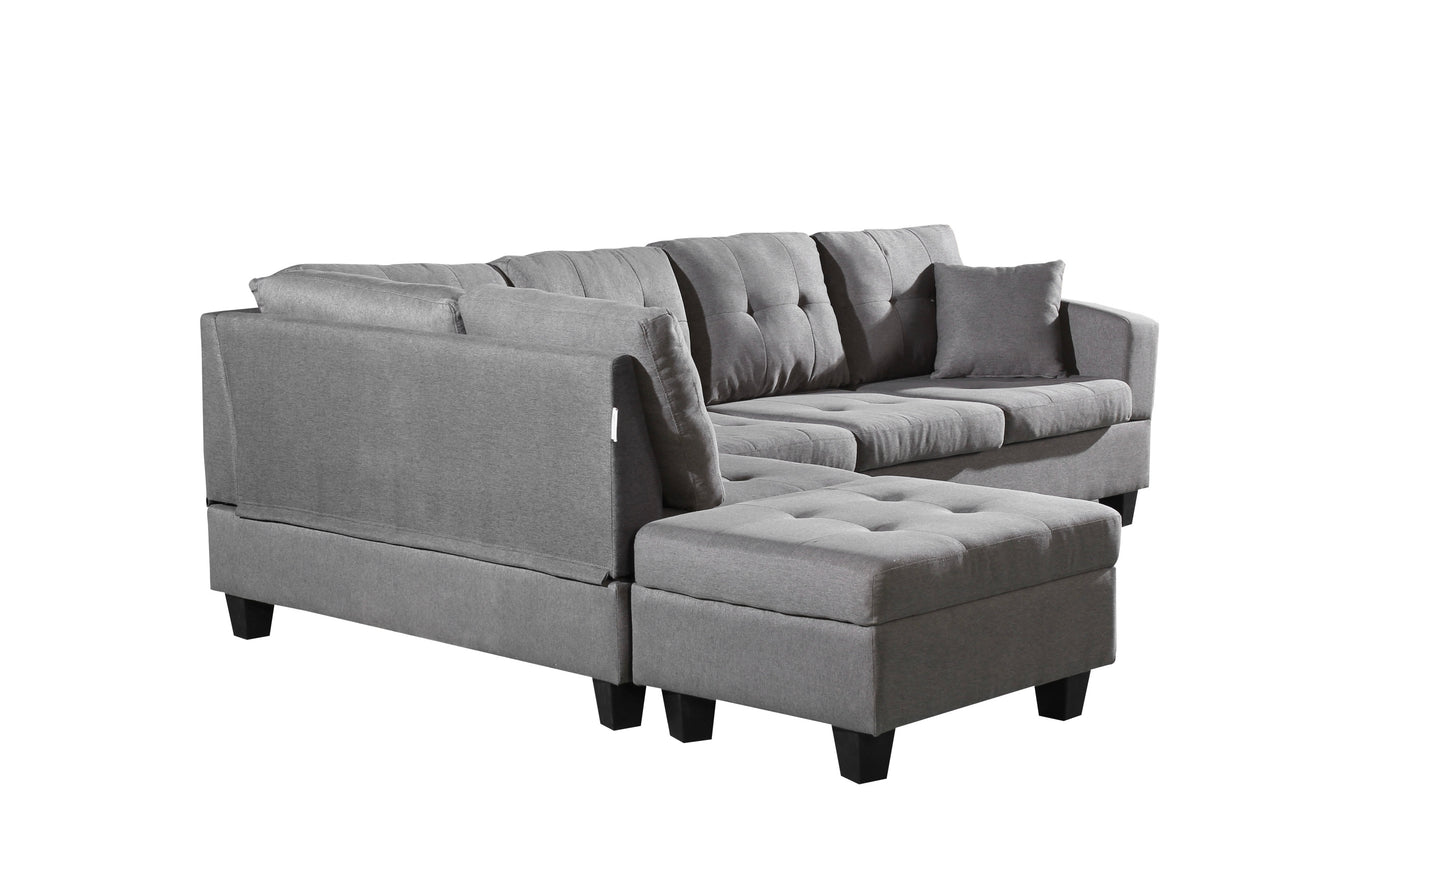 Fabric left Chaise Living Room Sofa Set with Storage Ottoman